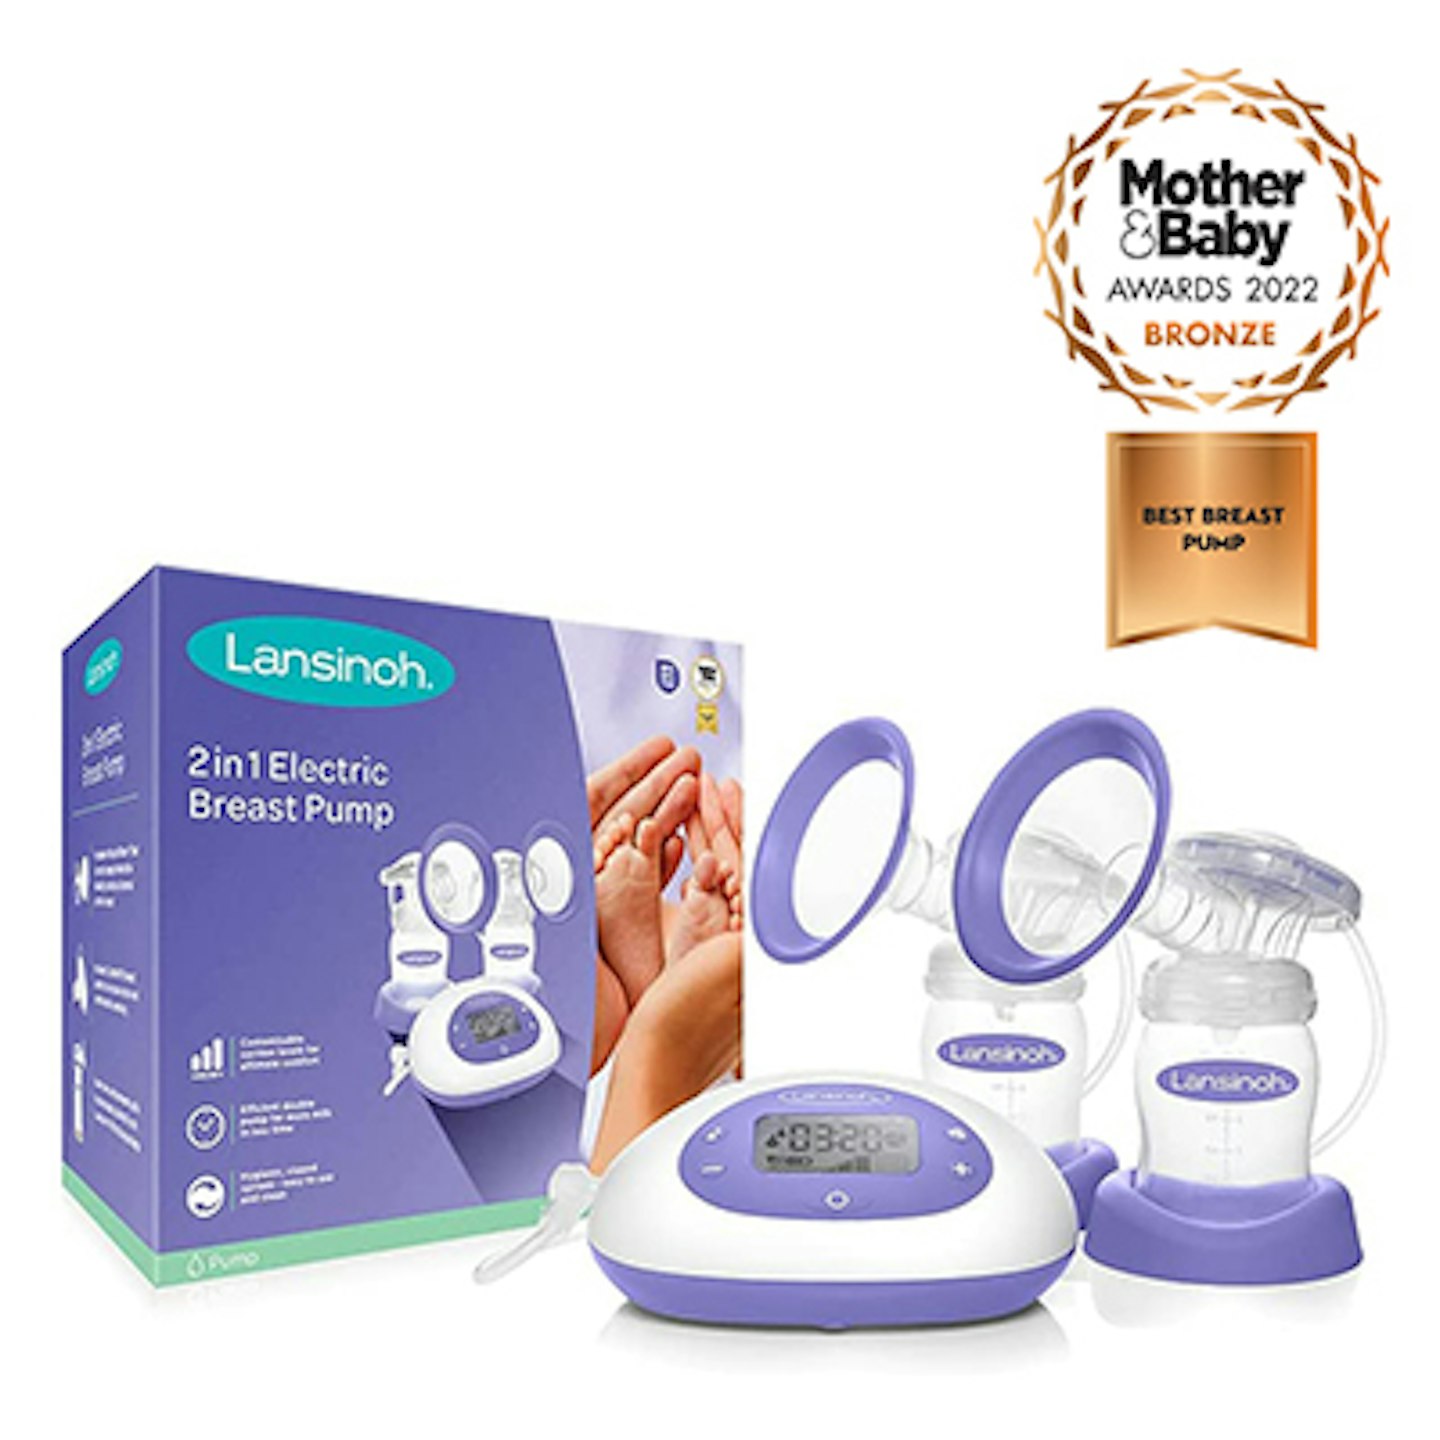 Lansinoh 2in1 Double Electric Breast Pump